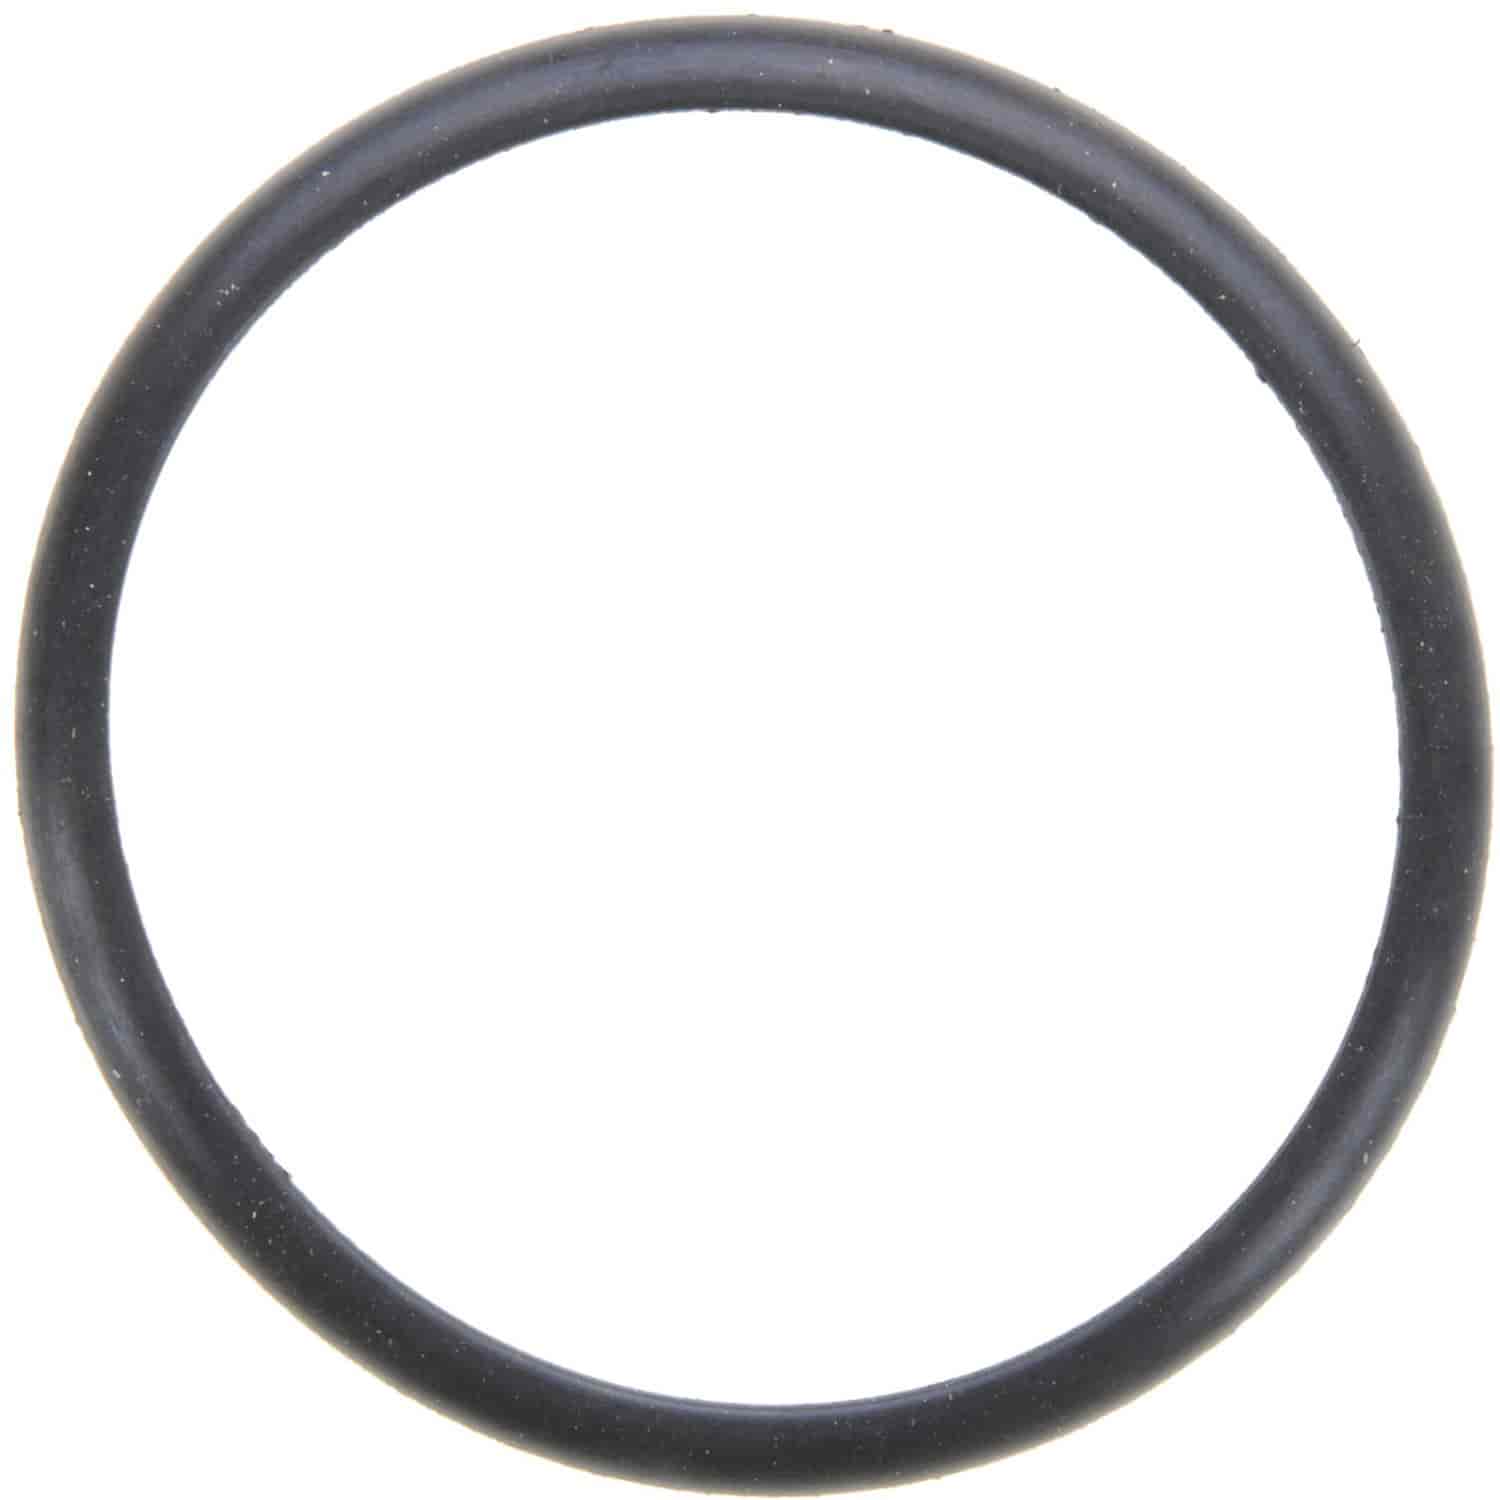 Thermostat Housing Gasket FORD 3.9L 32V DOHC 2000-2006 LINCOLN LS COOLANT OUTLET 54mm O-RING